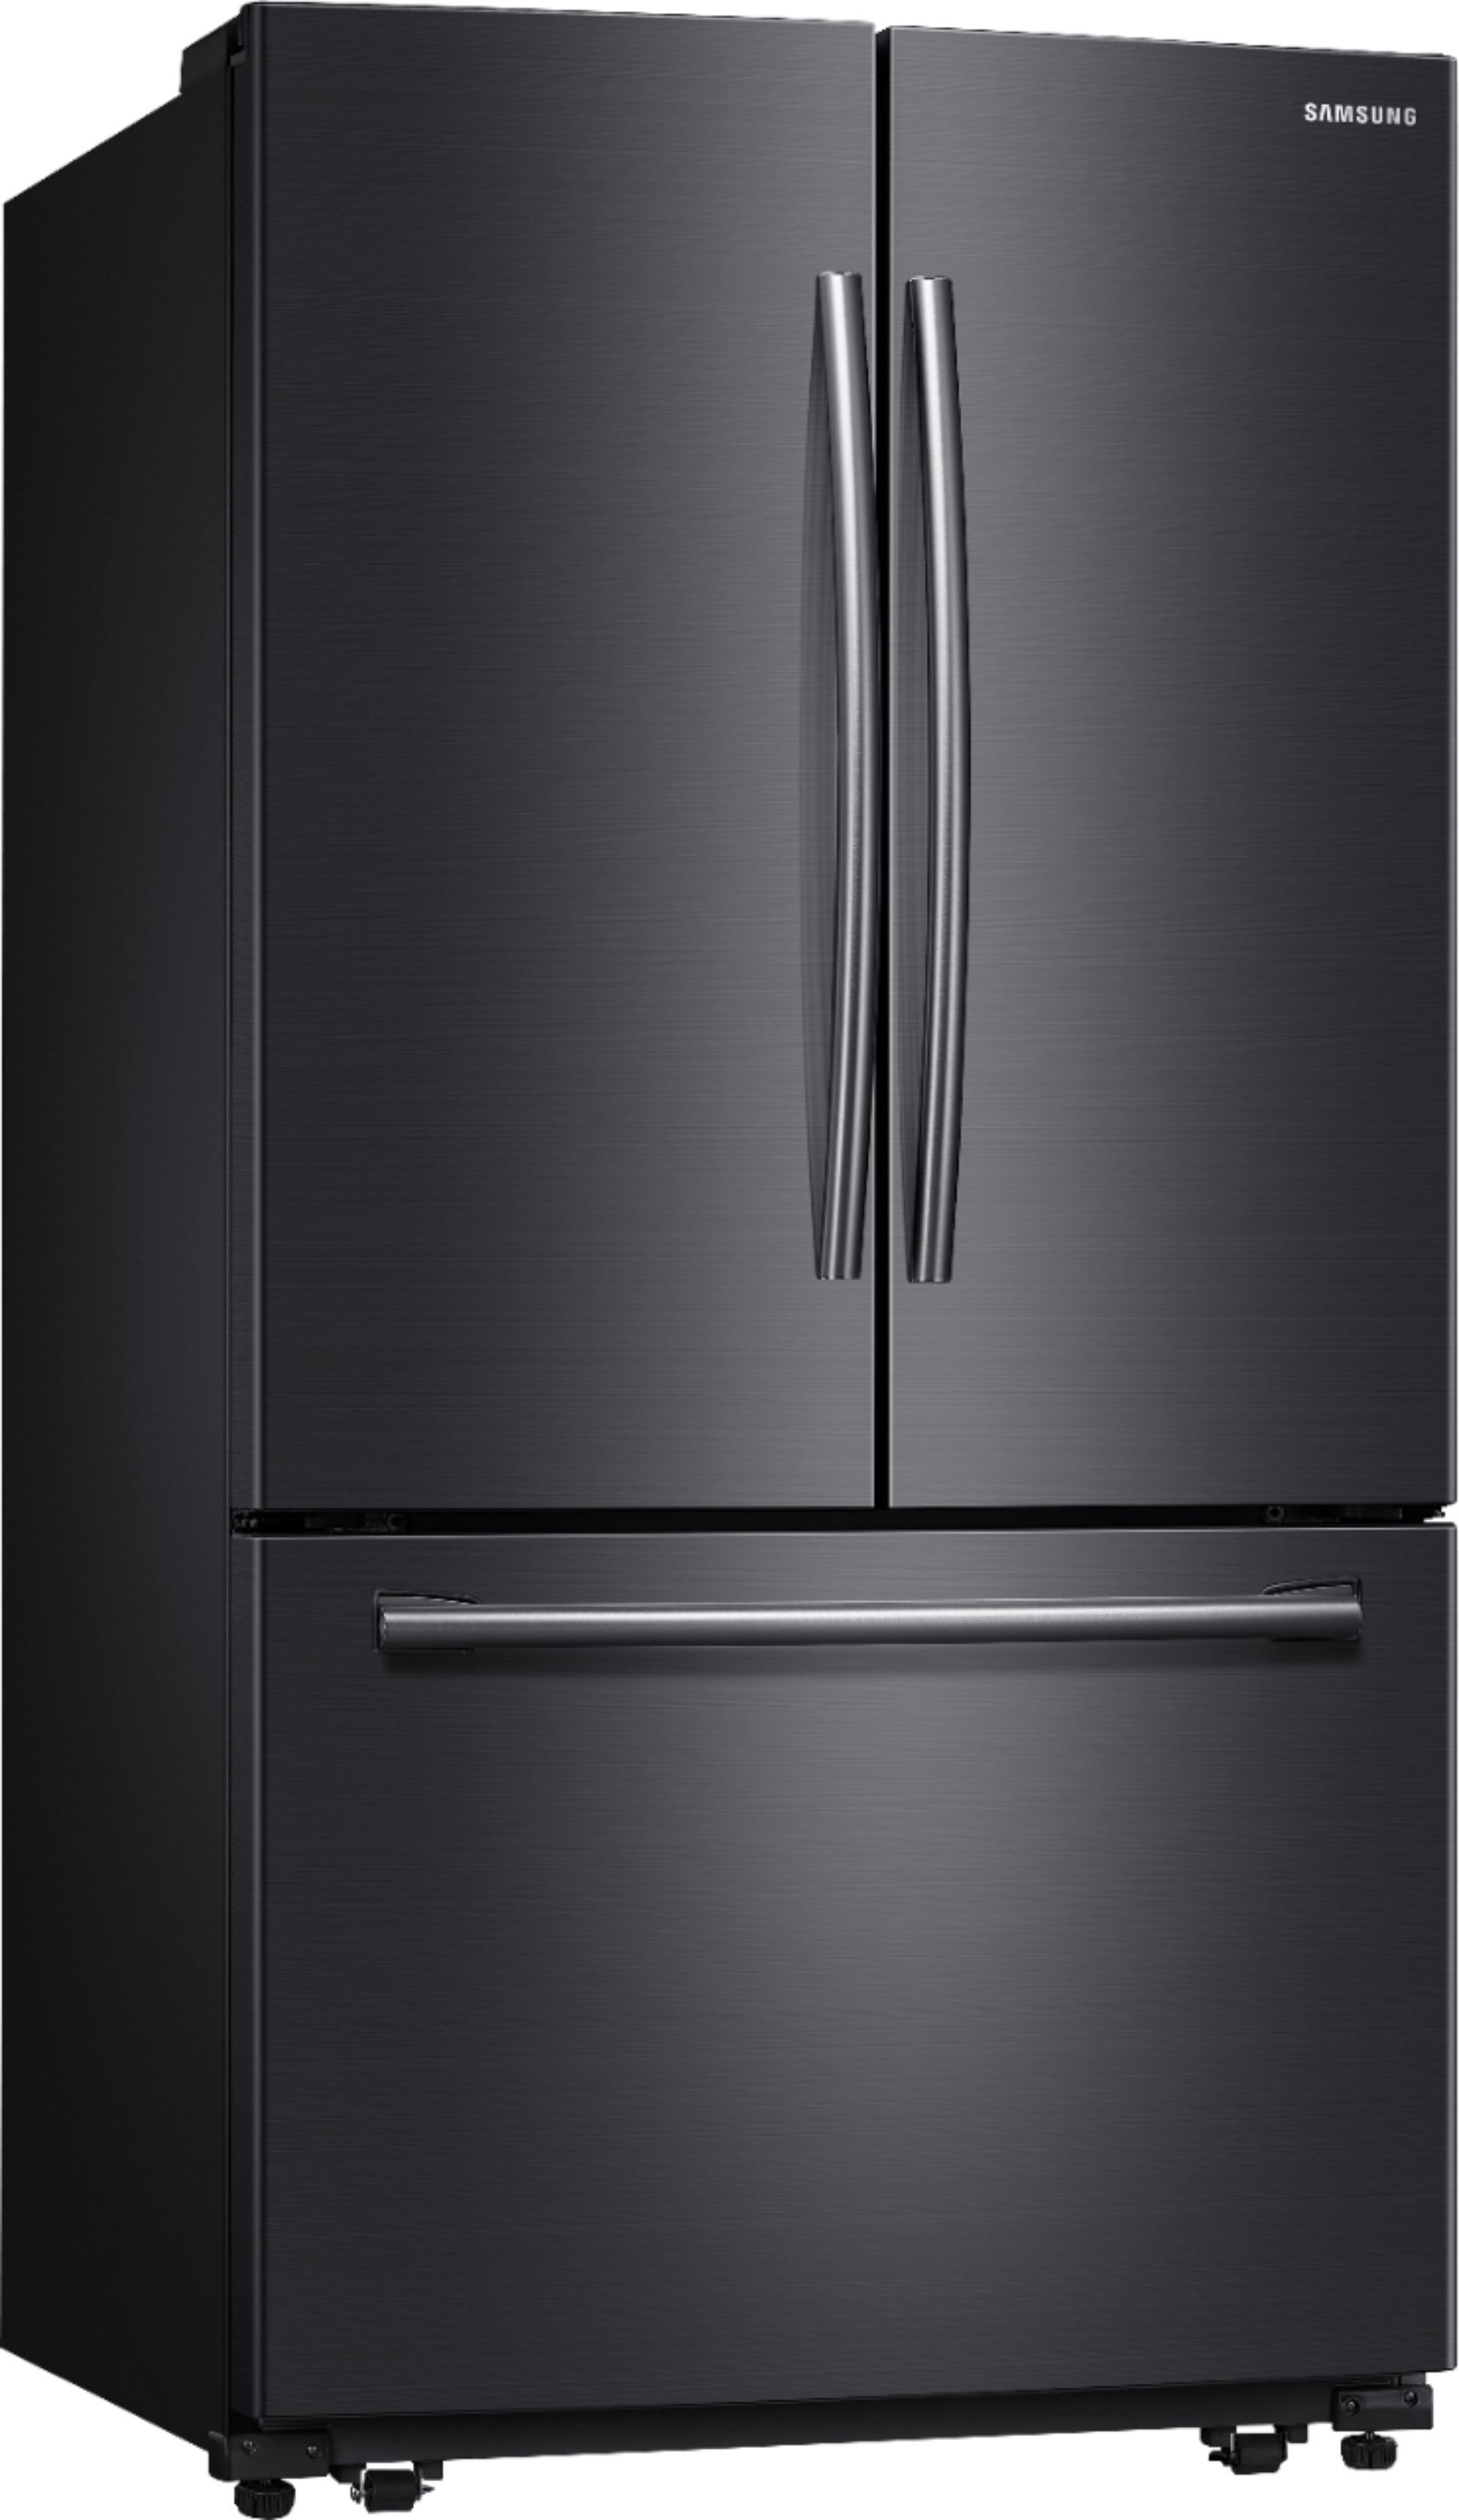 Angle View: Samsung - 25.5 Cu. Ft. French Door Fingerprint Resistant Refrigerator with Internal Water Dispenser - Black stainless steel